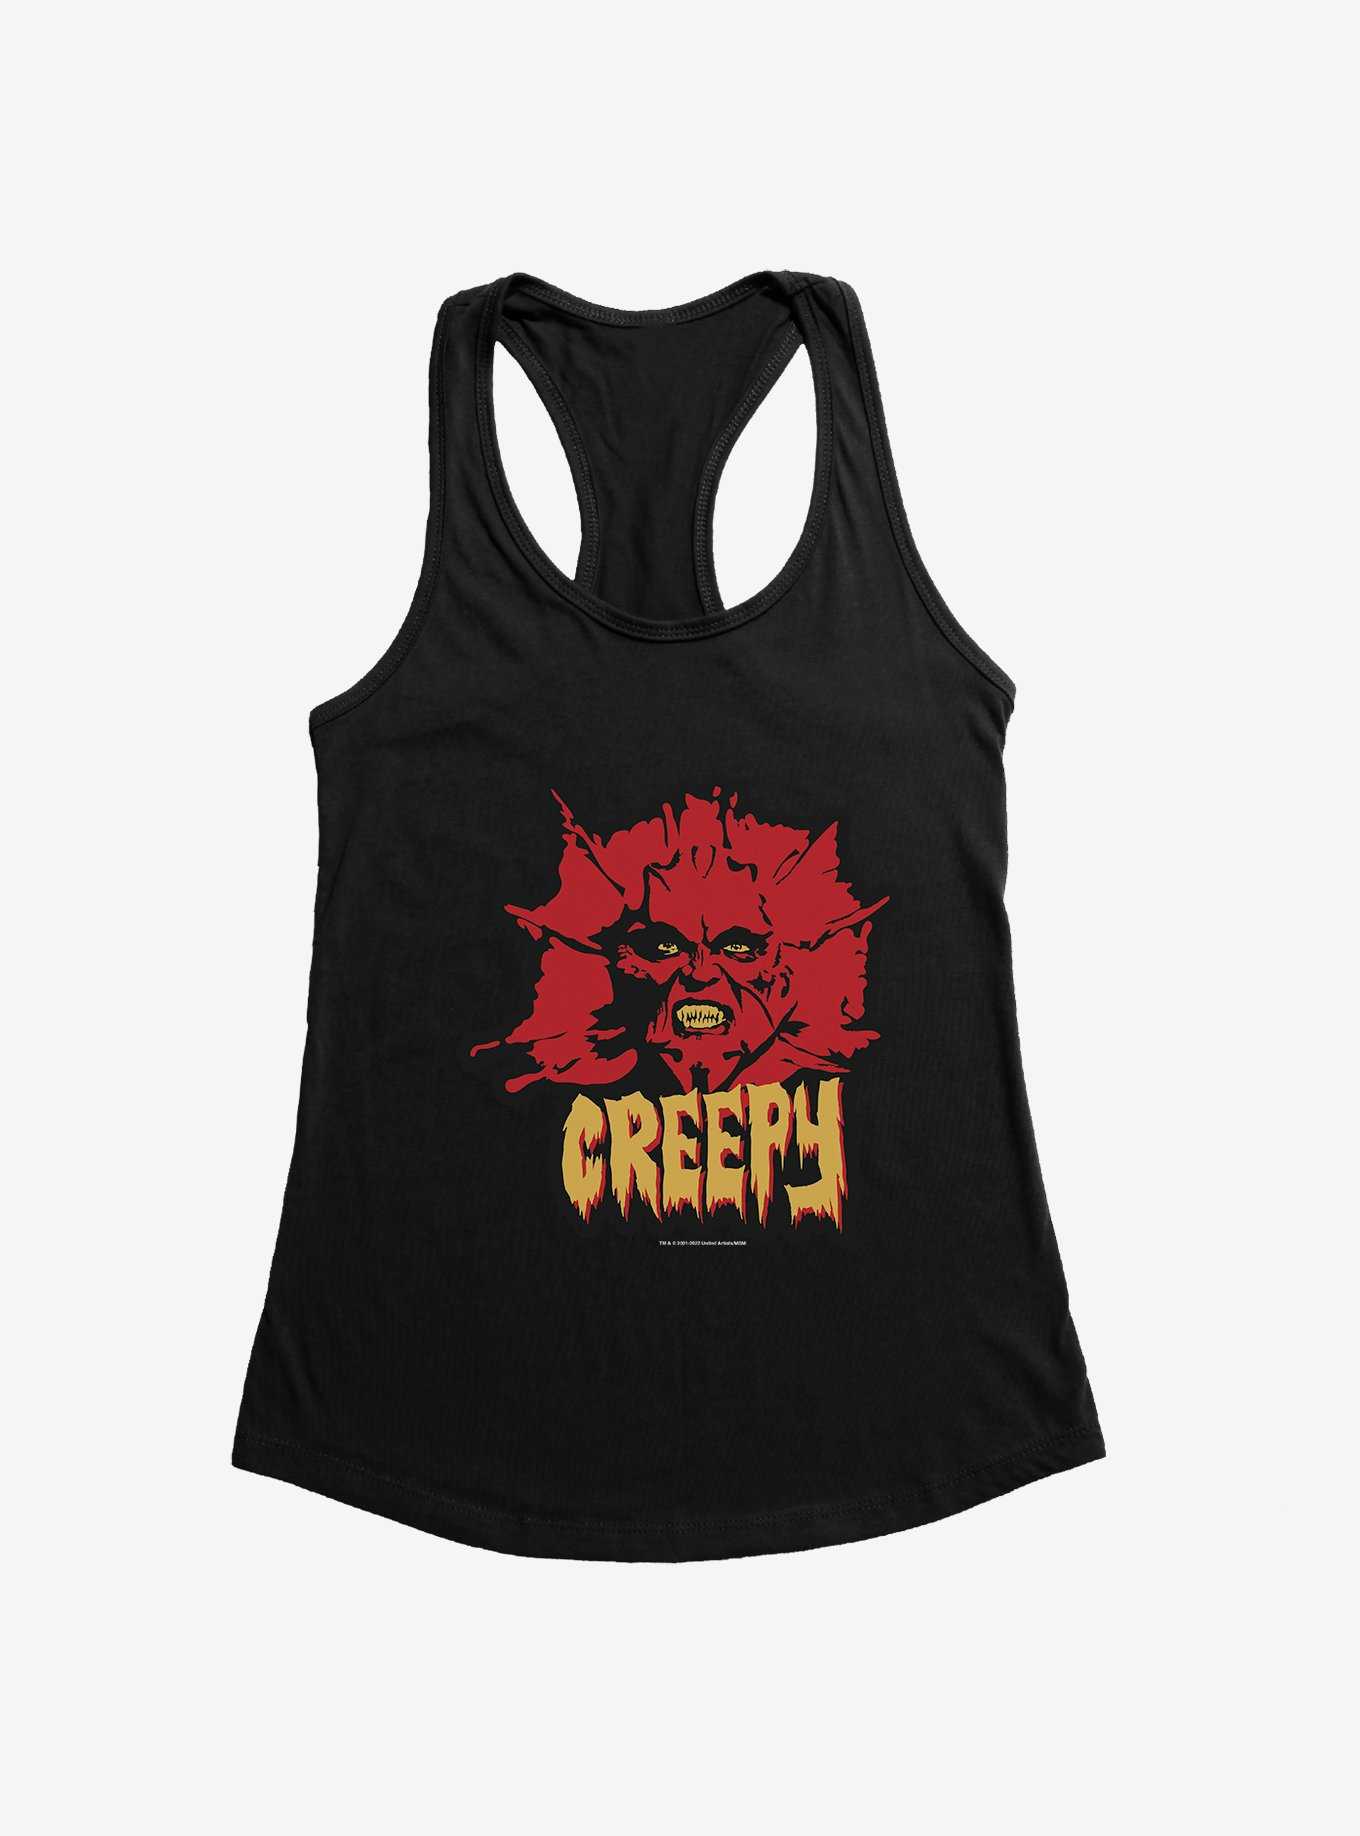 Jeepers Creepers Creepy Girls Tank, , hi-res